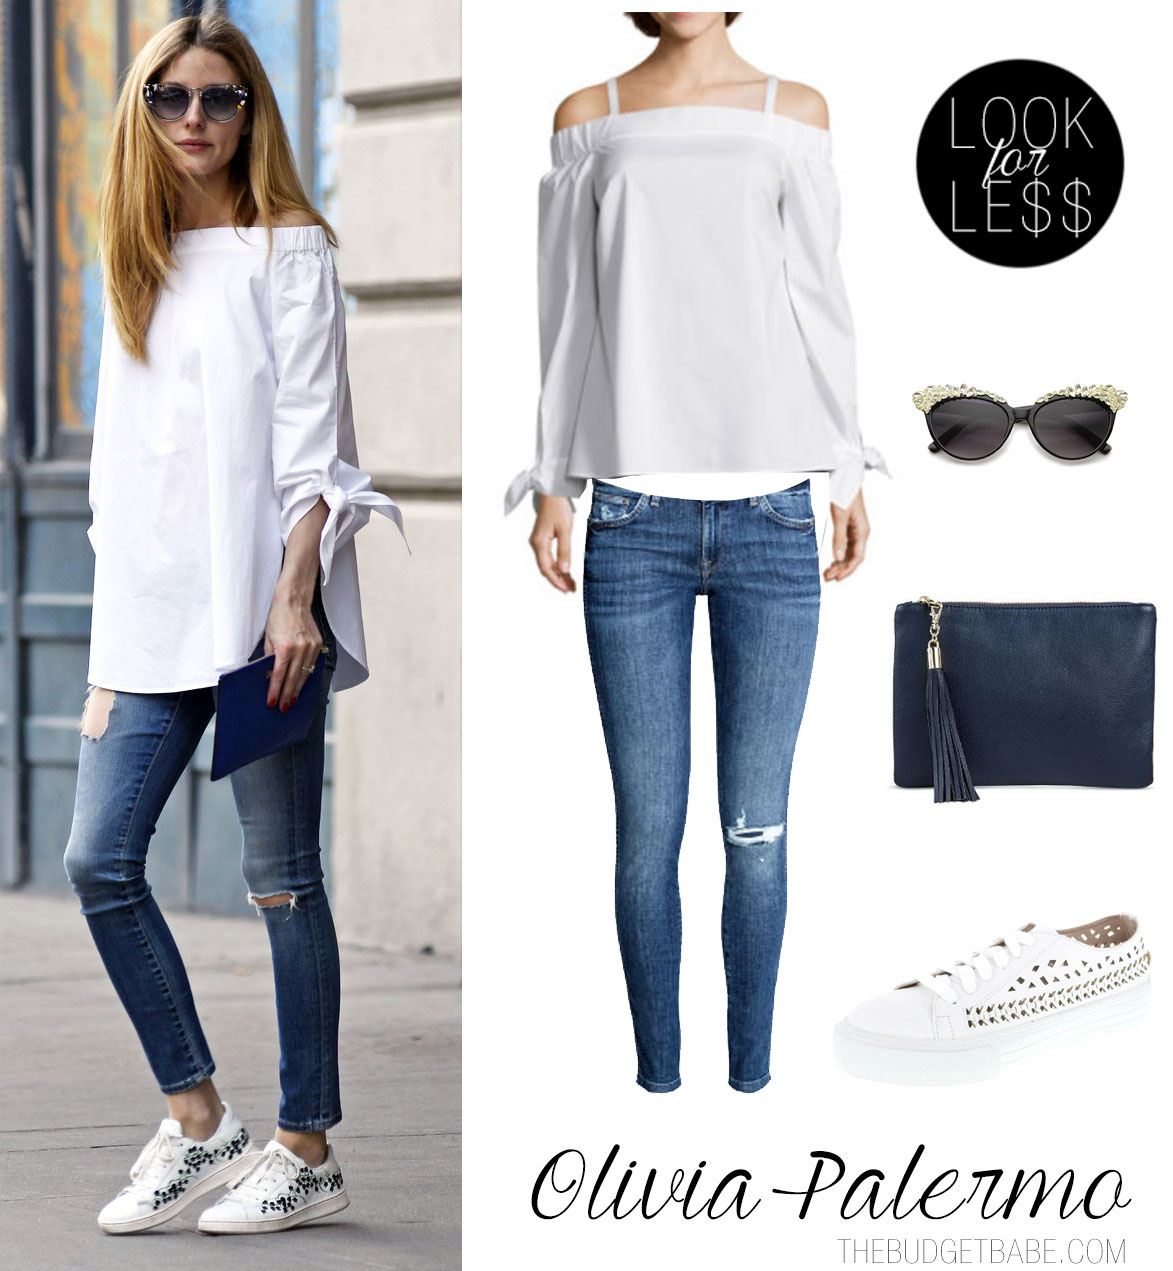 Olivia Palermo off-the-shoulder top and sneakers look for less